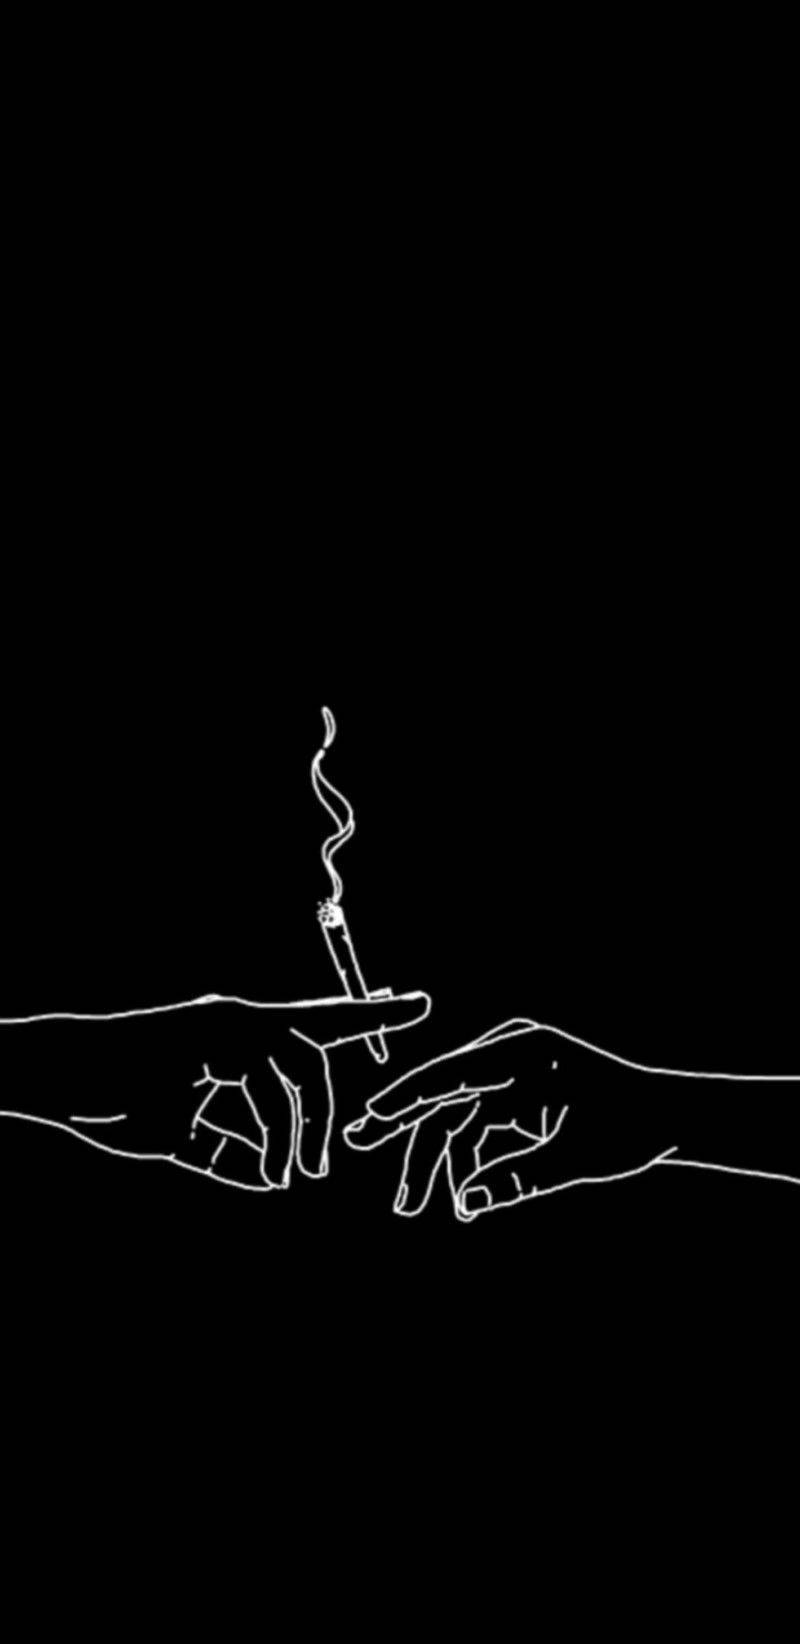 Cute Black And White Aesthetic Sharing Cigarette